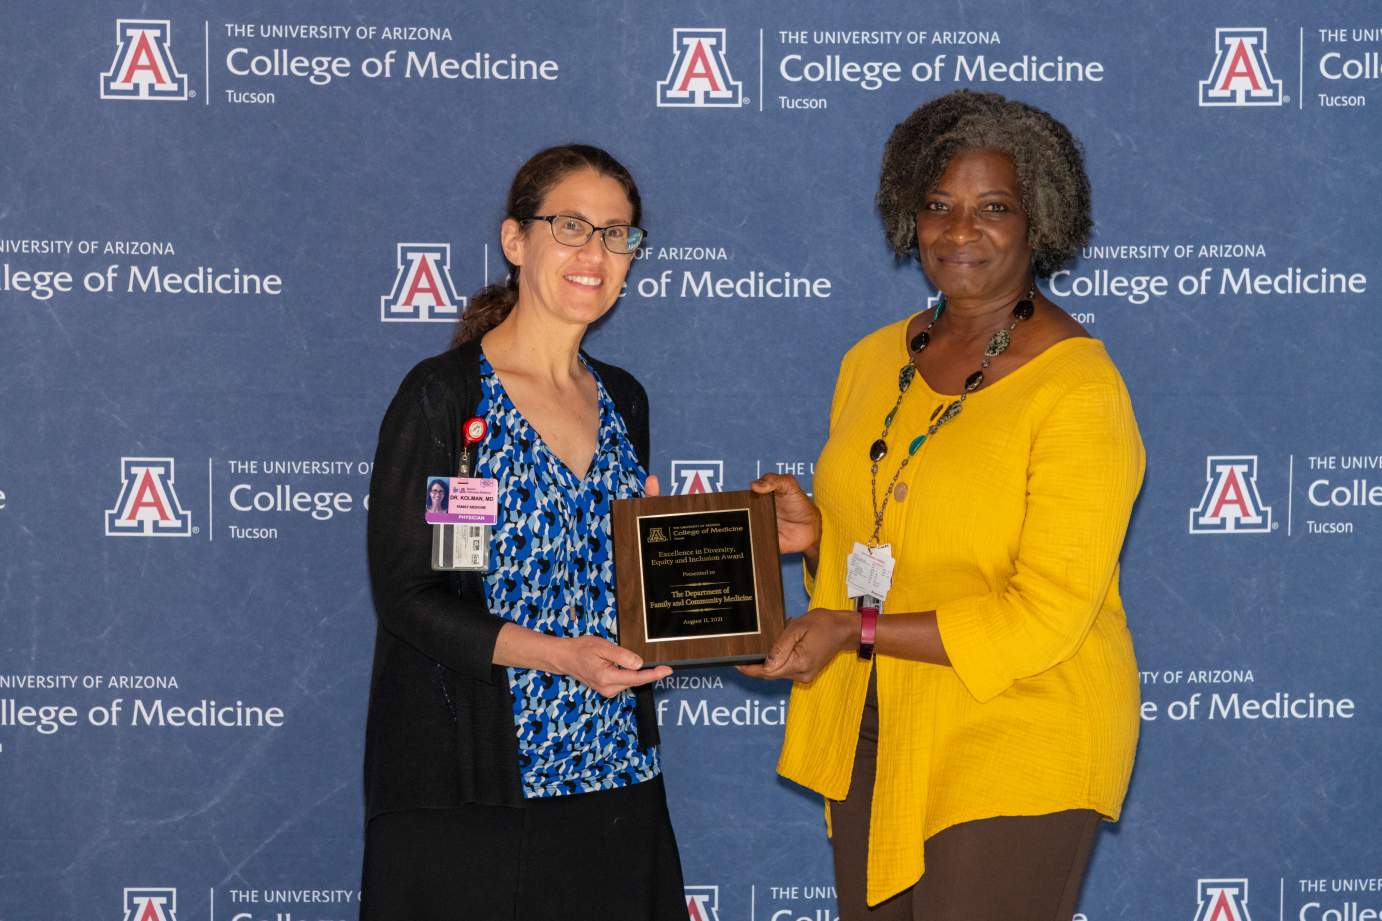 [Dr. Karyn Kolman accepts the Awards for Excellence in Diversity, Equity, and Inclusion for the Department of Family and Community Medicine presented by Dr. Victoria Murrain.]